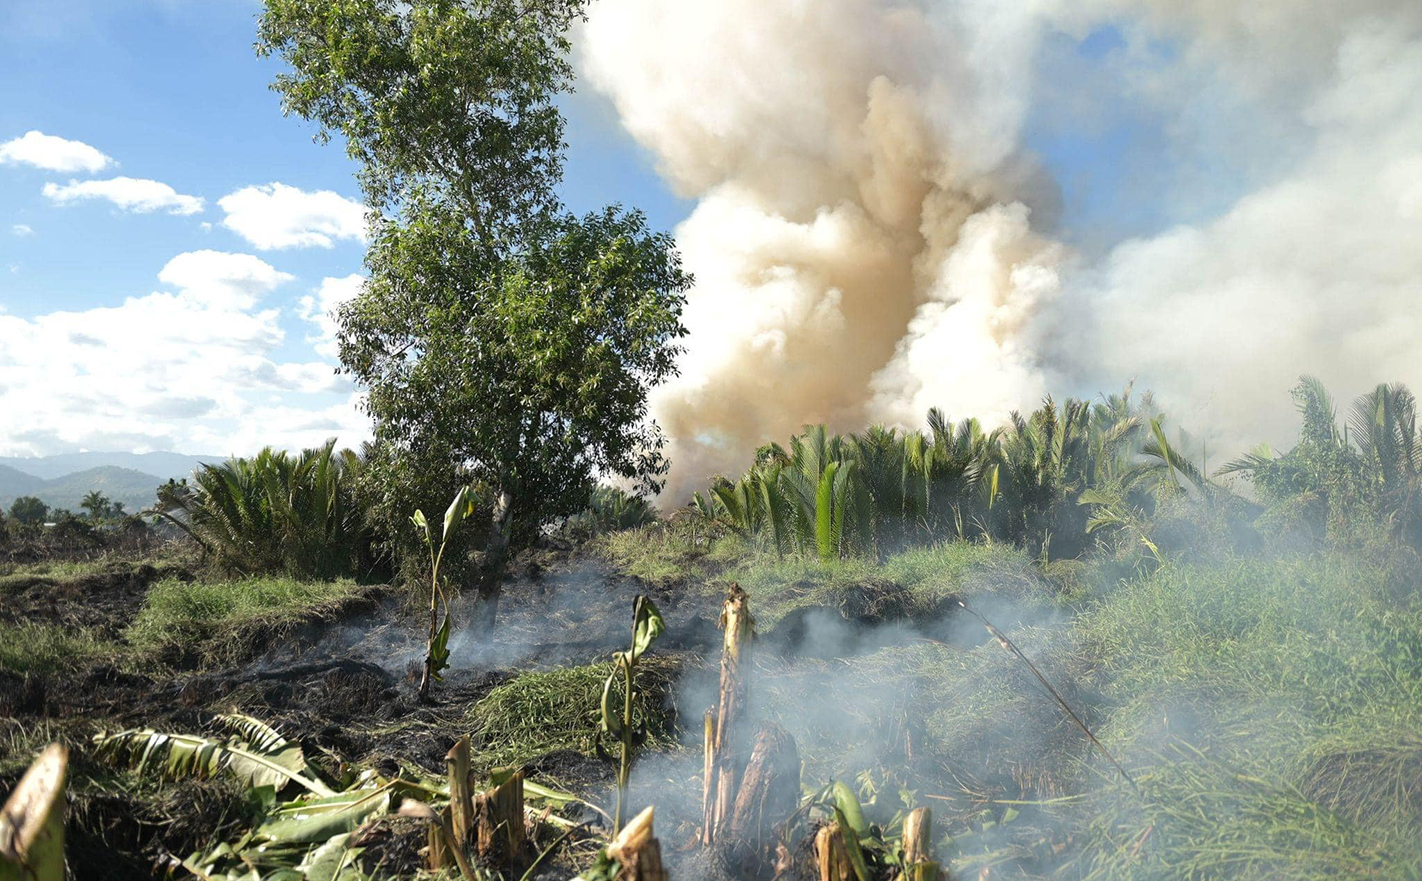 Eight hectares of grassland affected by Zamboanga City fire